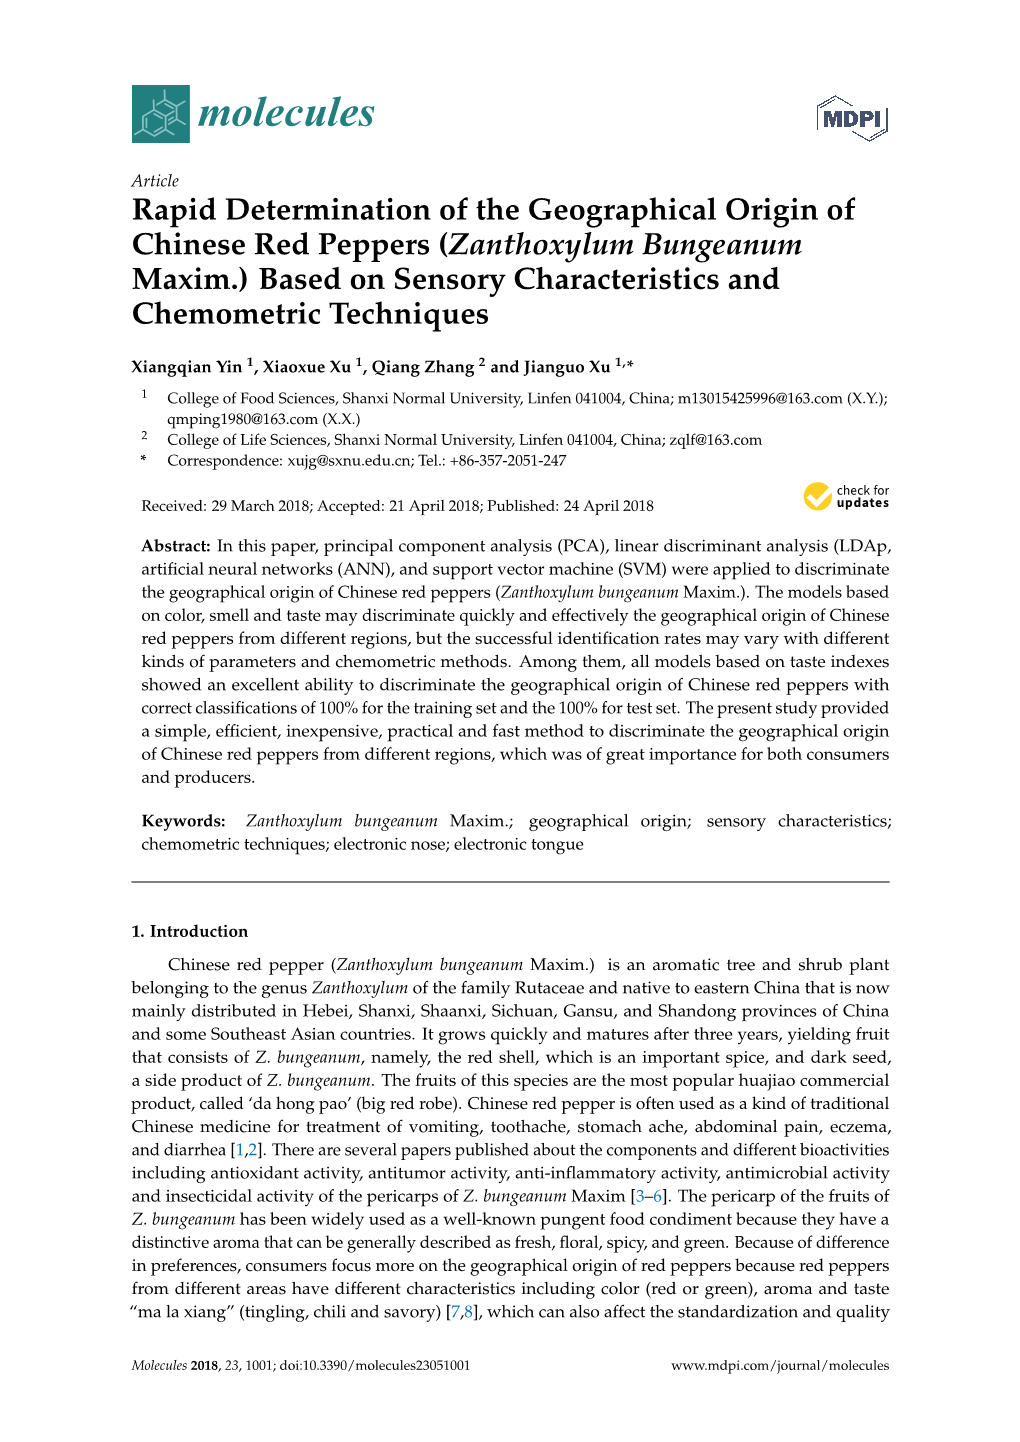 Rapid Determination of the Geographical Origin of Chinese Red Peppers (Zanthoxylum Bungeanum Maxim.) Based on Sensory Characteristics and Chemometric Techniques